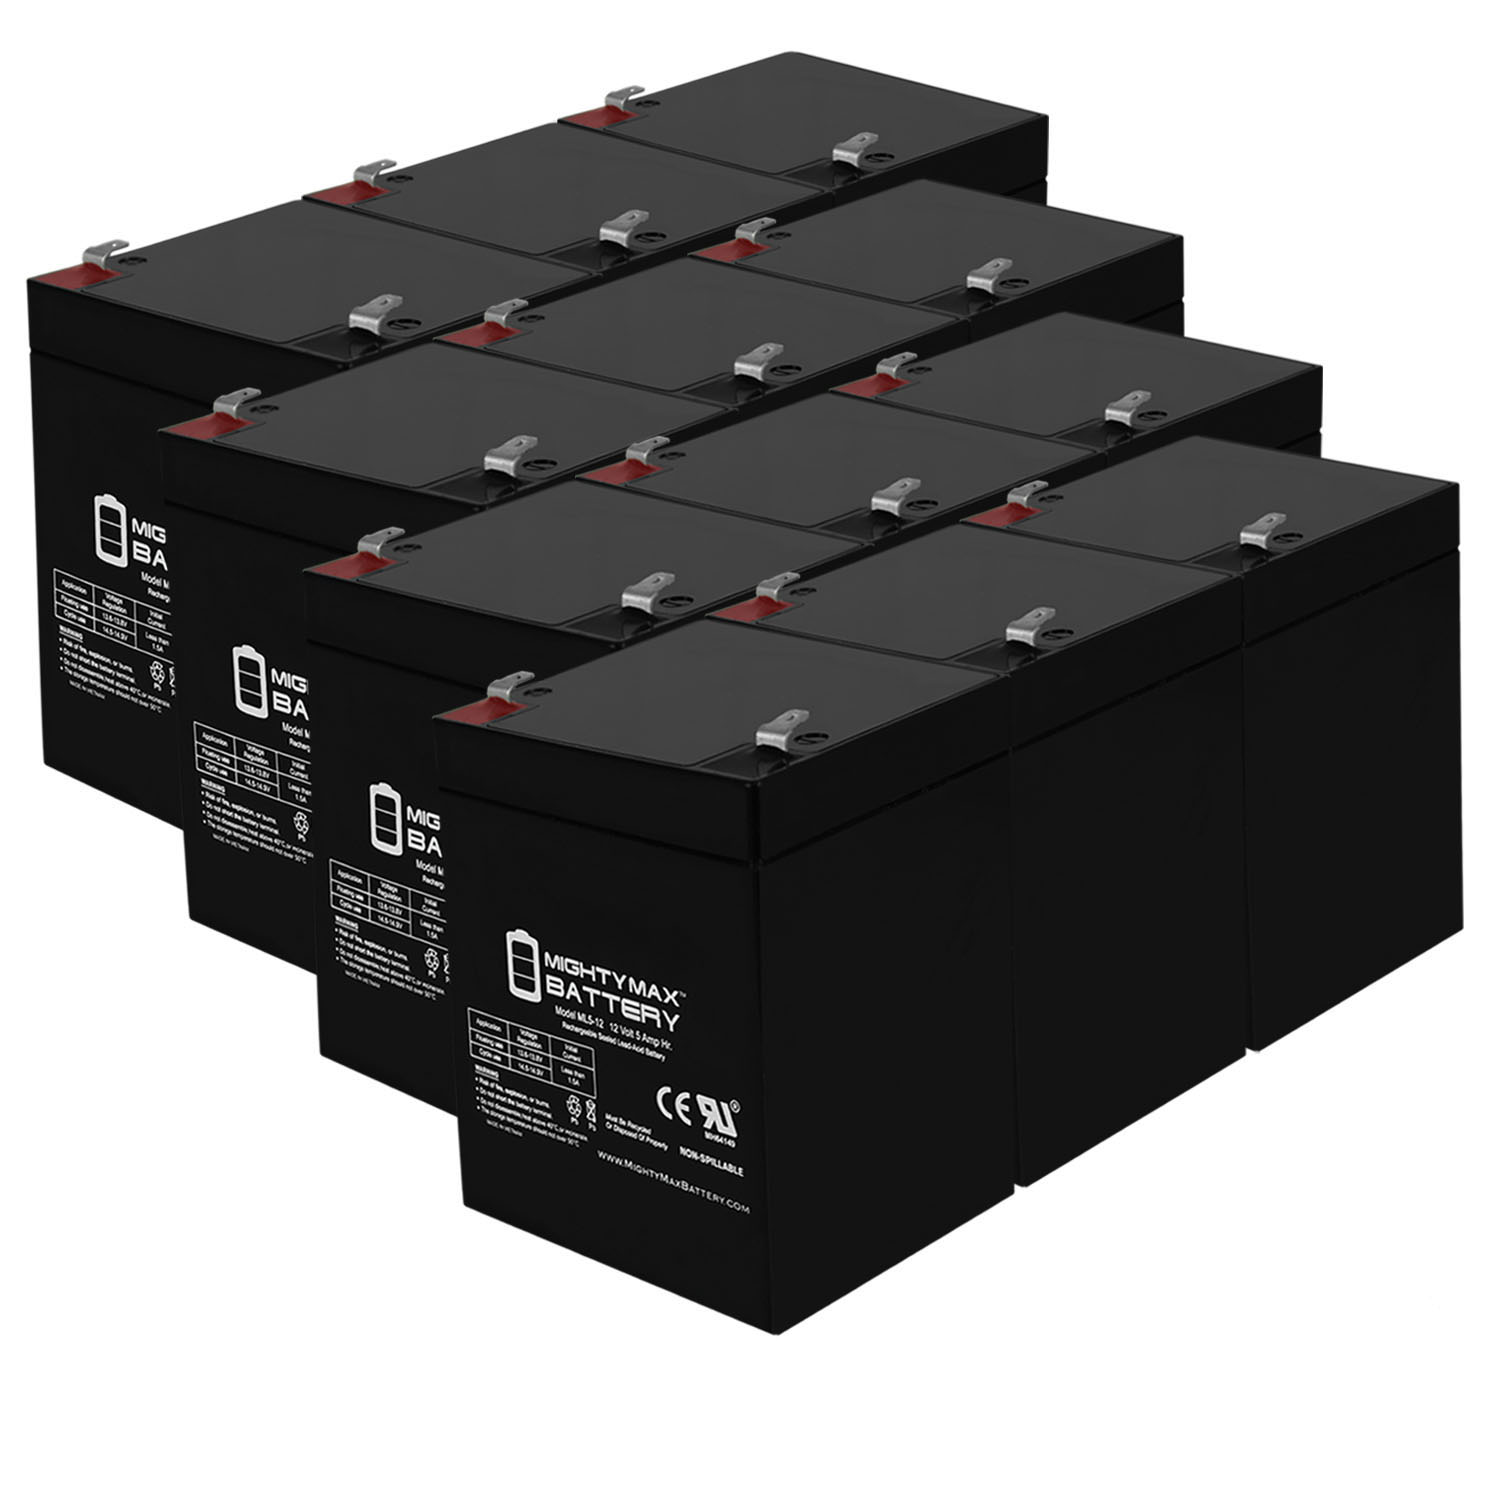 12V 5AH SLA Replacement Battery for Neata NT12-5A - 12 Pack